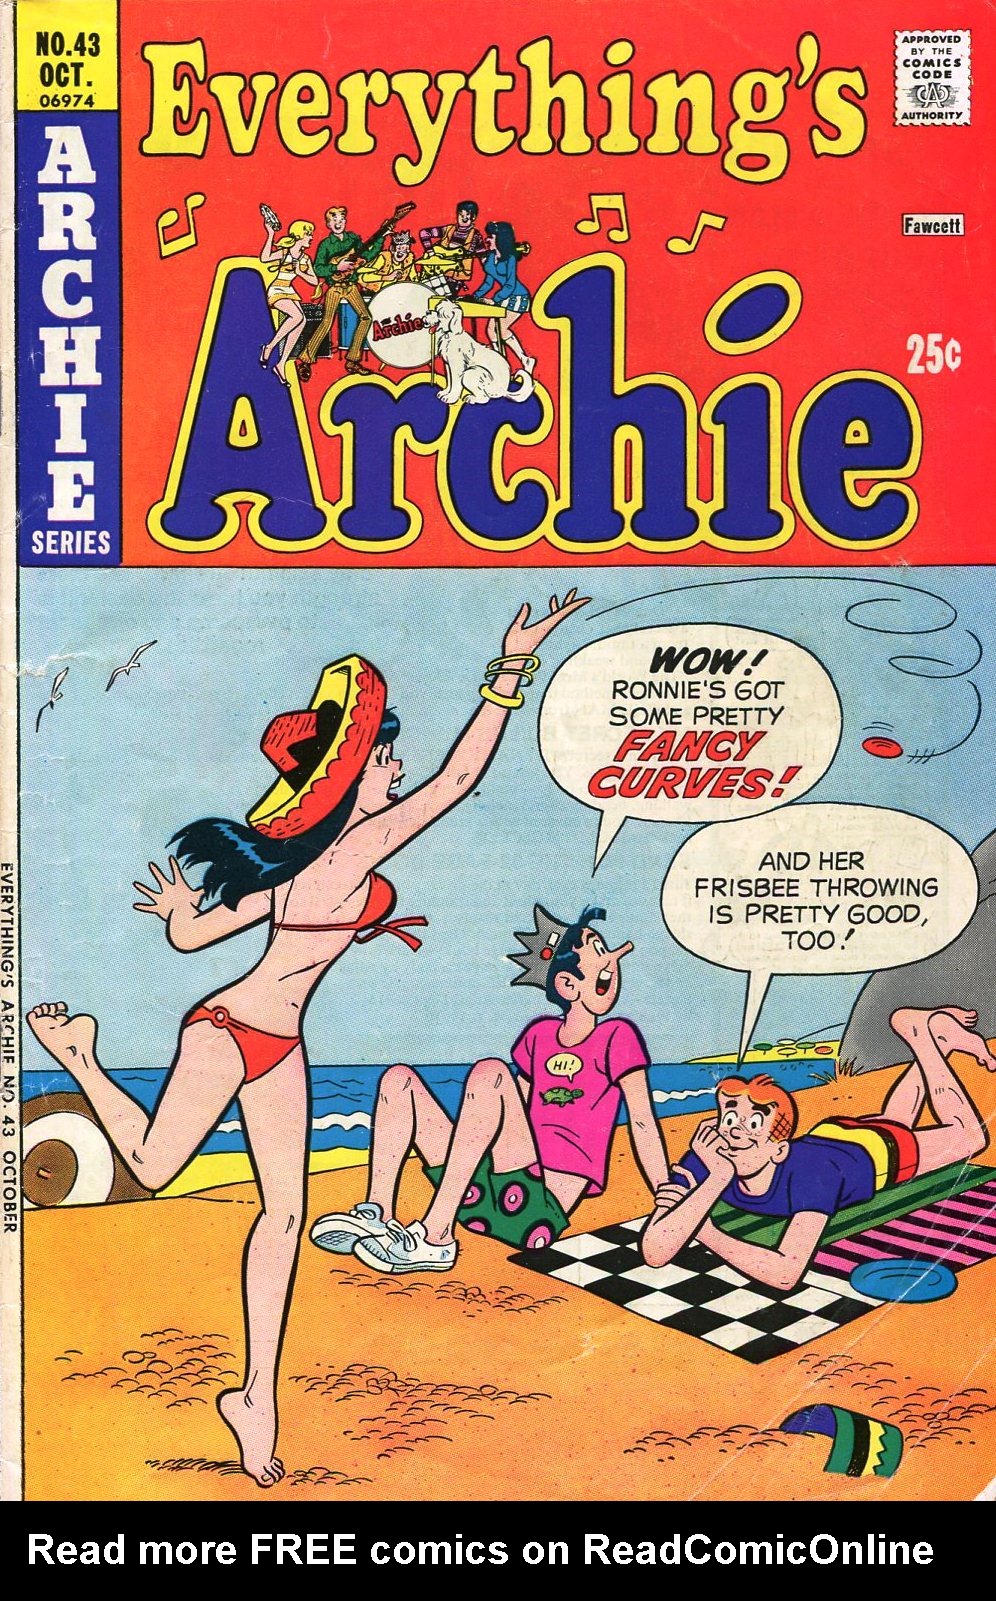 Read online Everything's Archie comic -  Issue #43 - 1